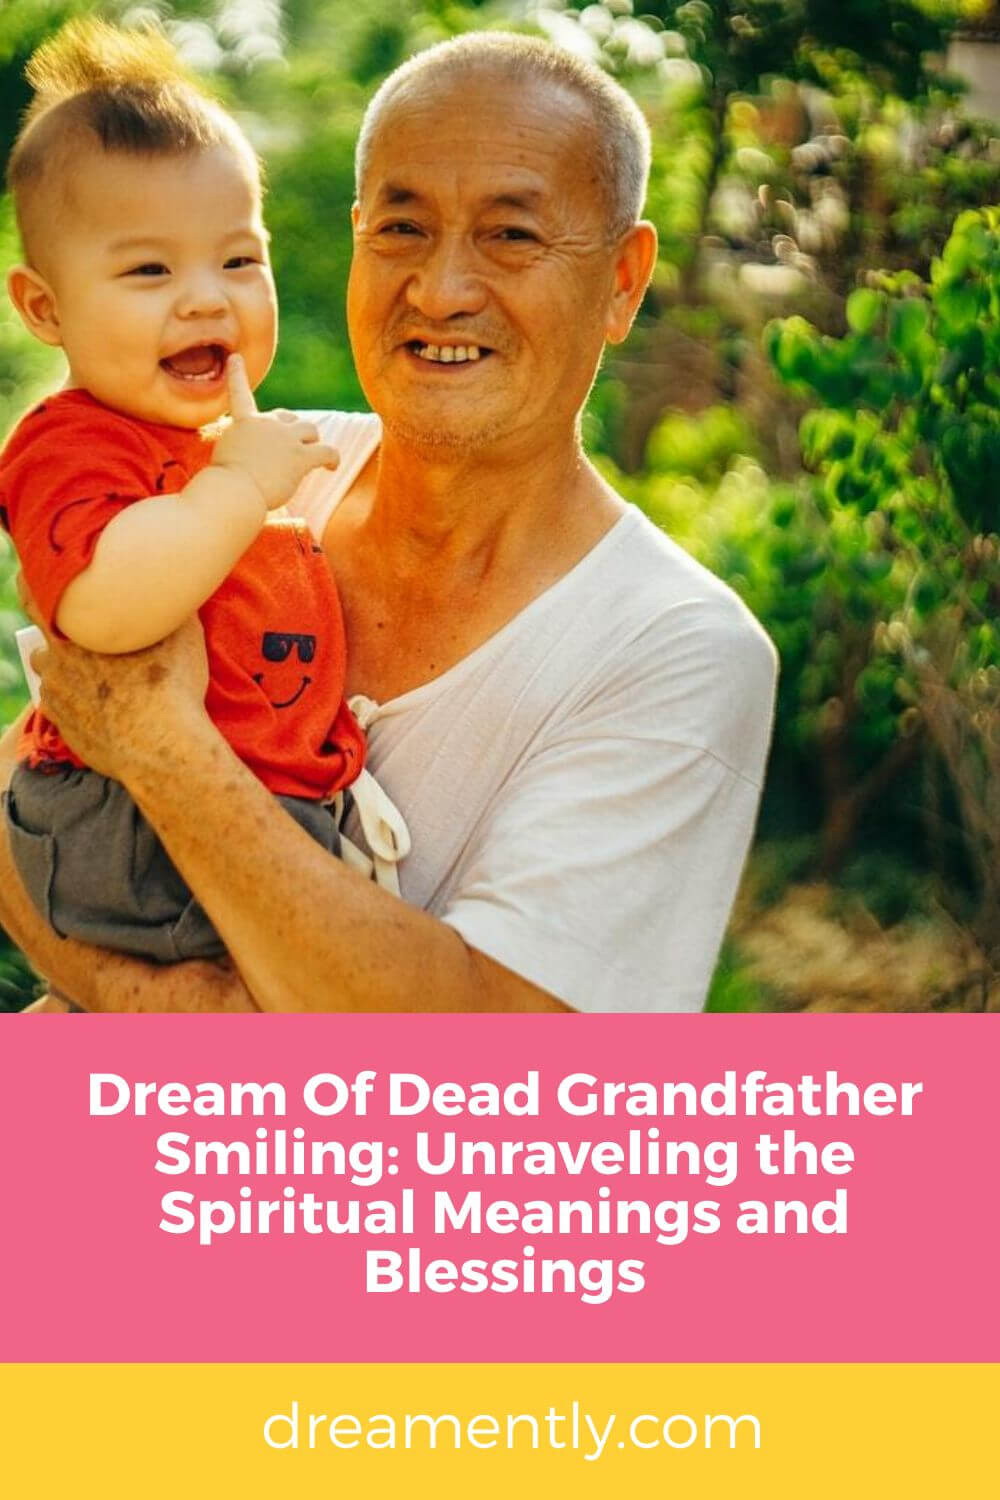 Dream Of Dead Grandfather Smiling- Unraveling the Spiritual Meanings and Blessings (2)